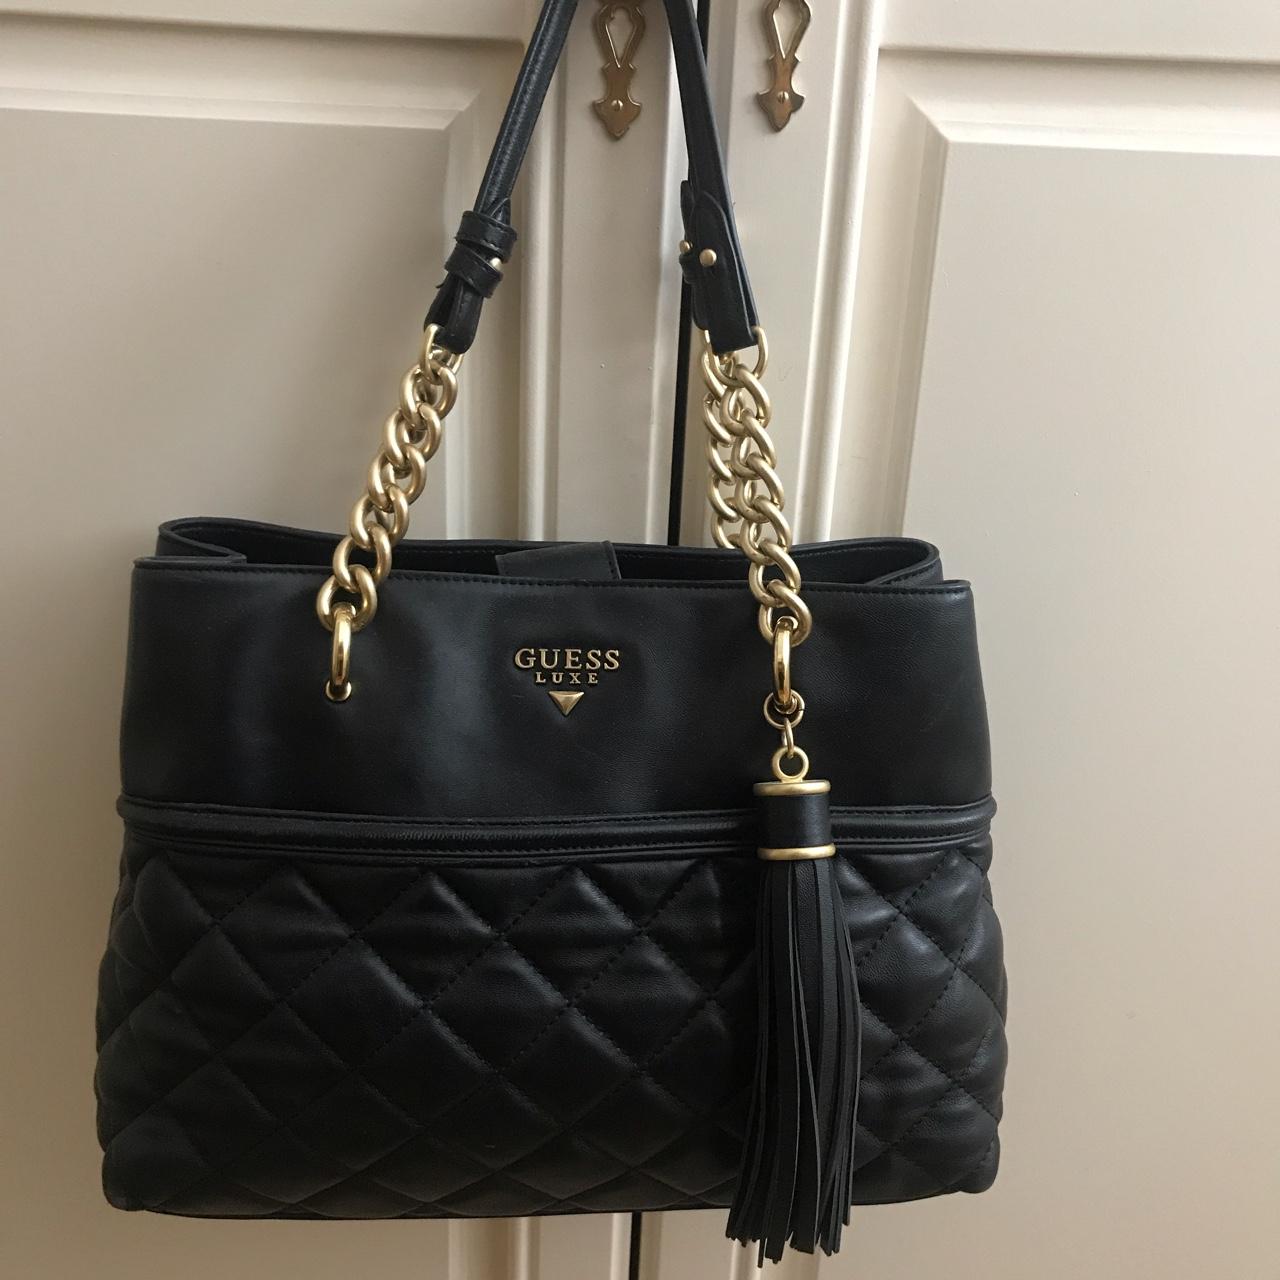 Genuine guess luxe black and gold quilted leather